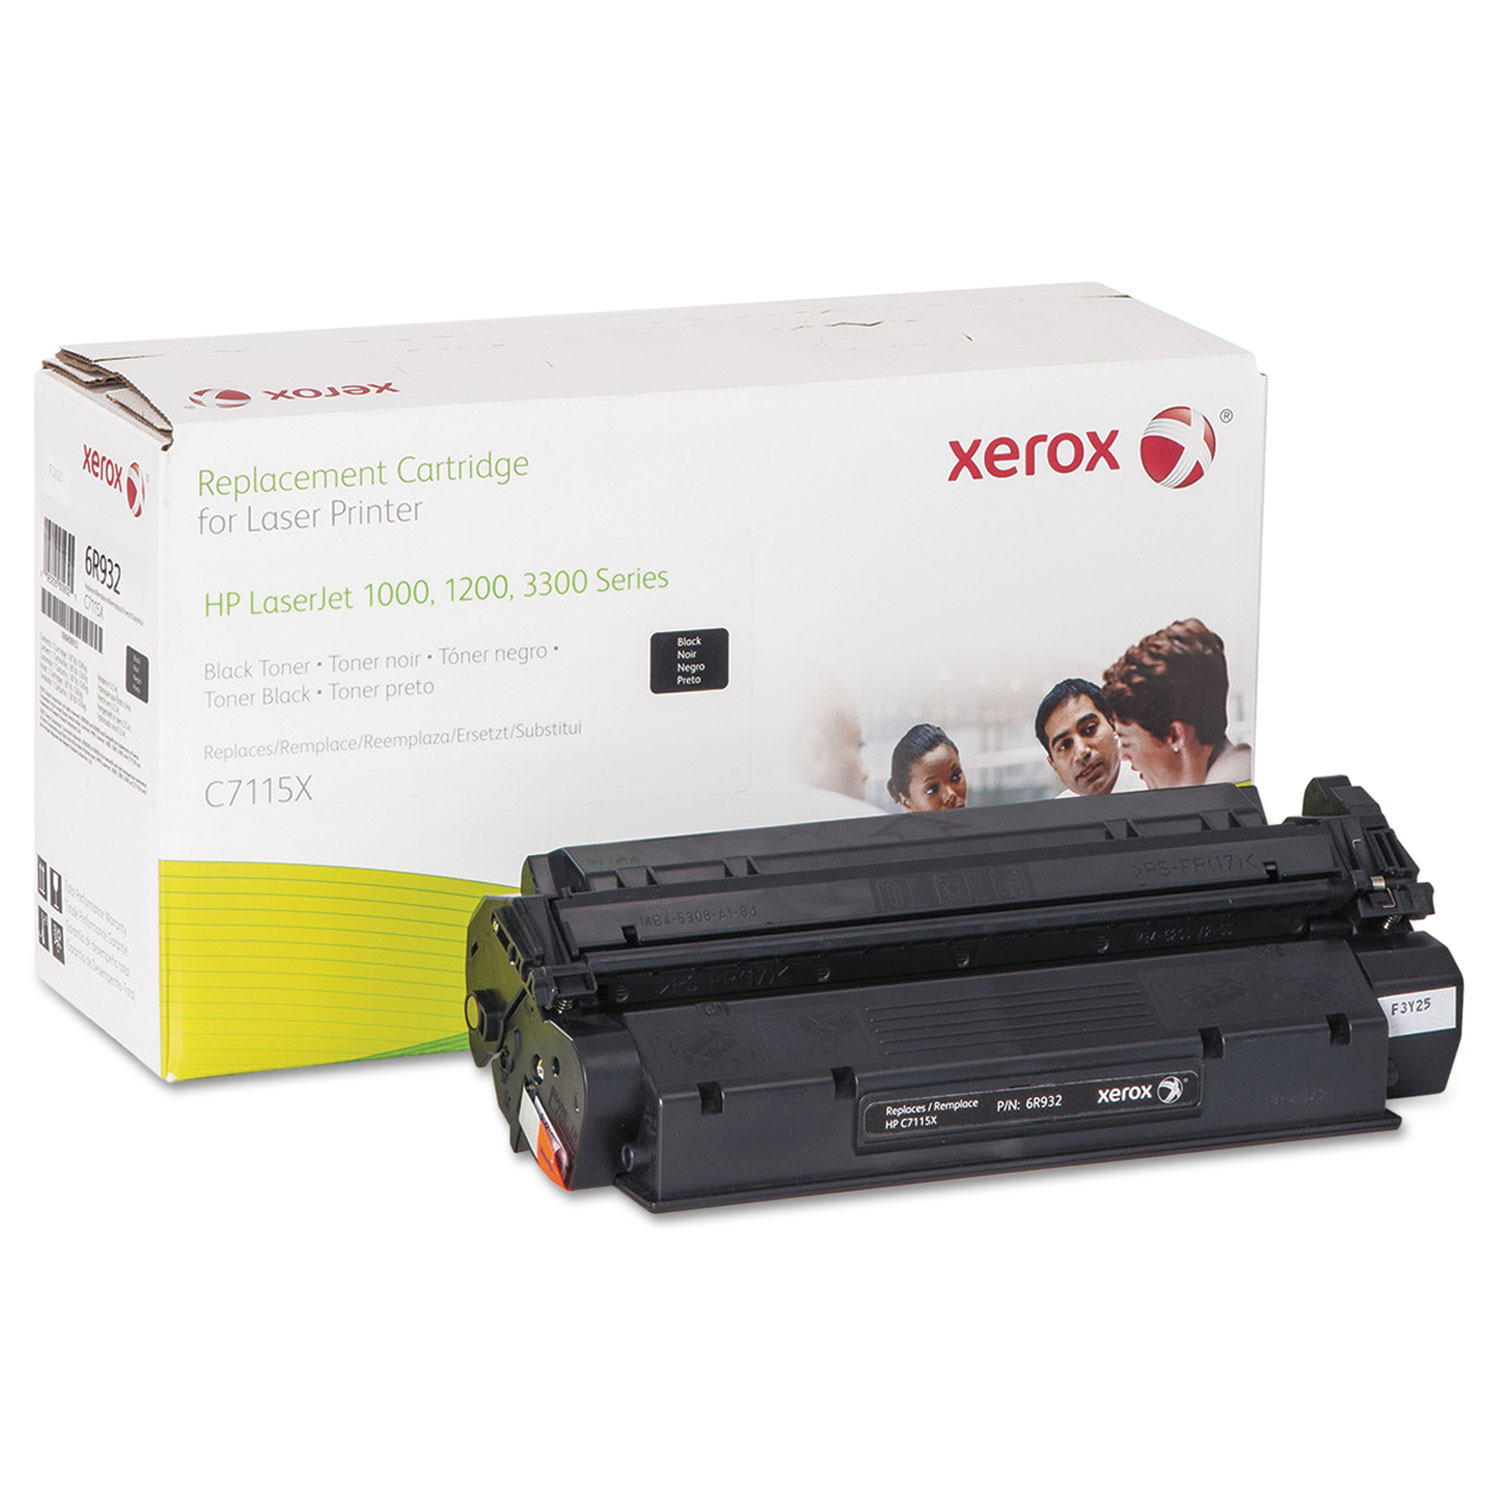  Xerox 006R00932 006R00932 Replacement High-Yield Toner for C7115X (15X), 4200 Page Yield, Black (XER006R00932) 